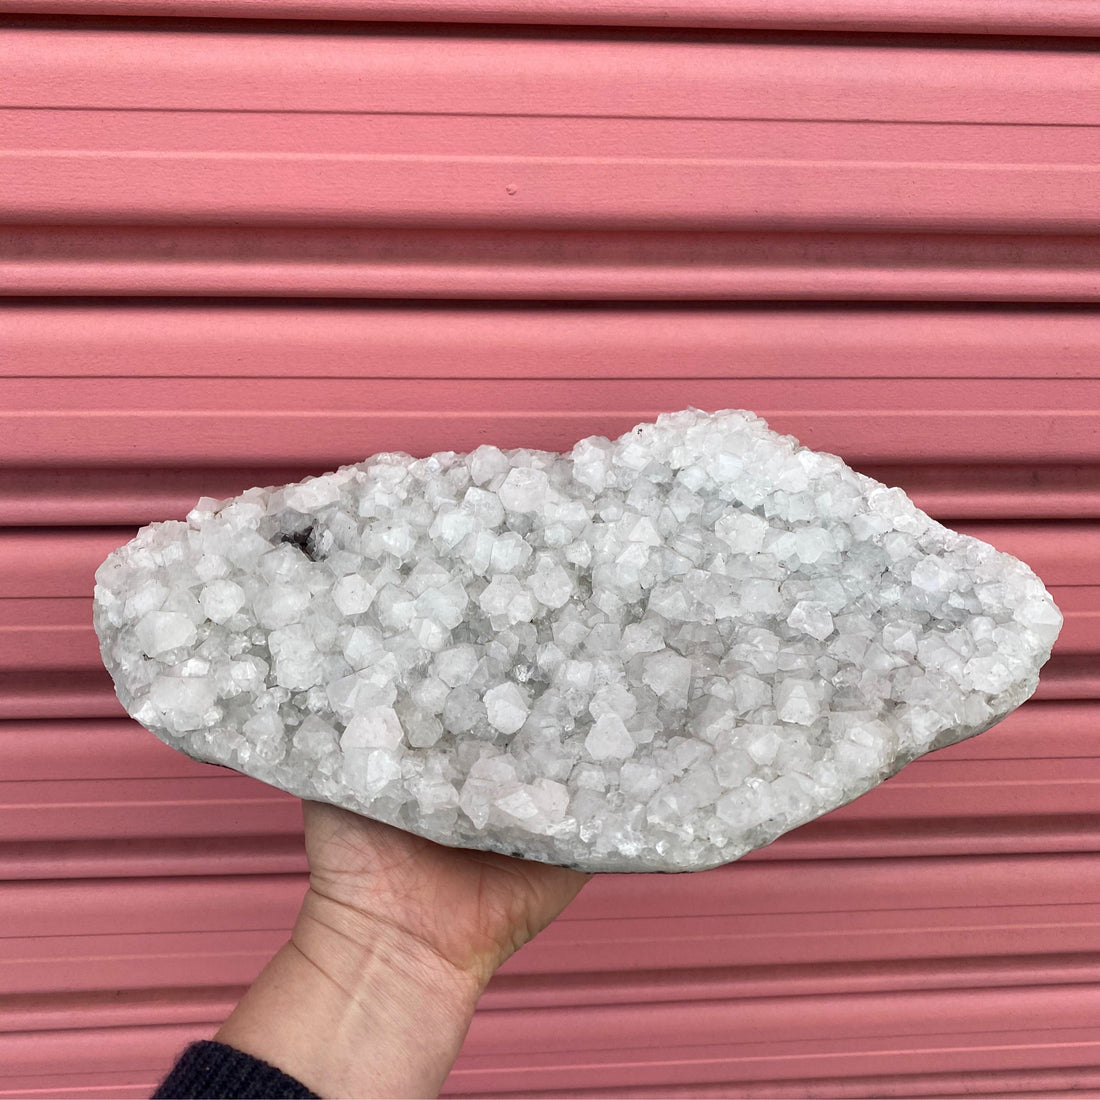 2kg piece of crystal